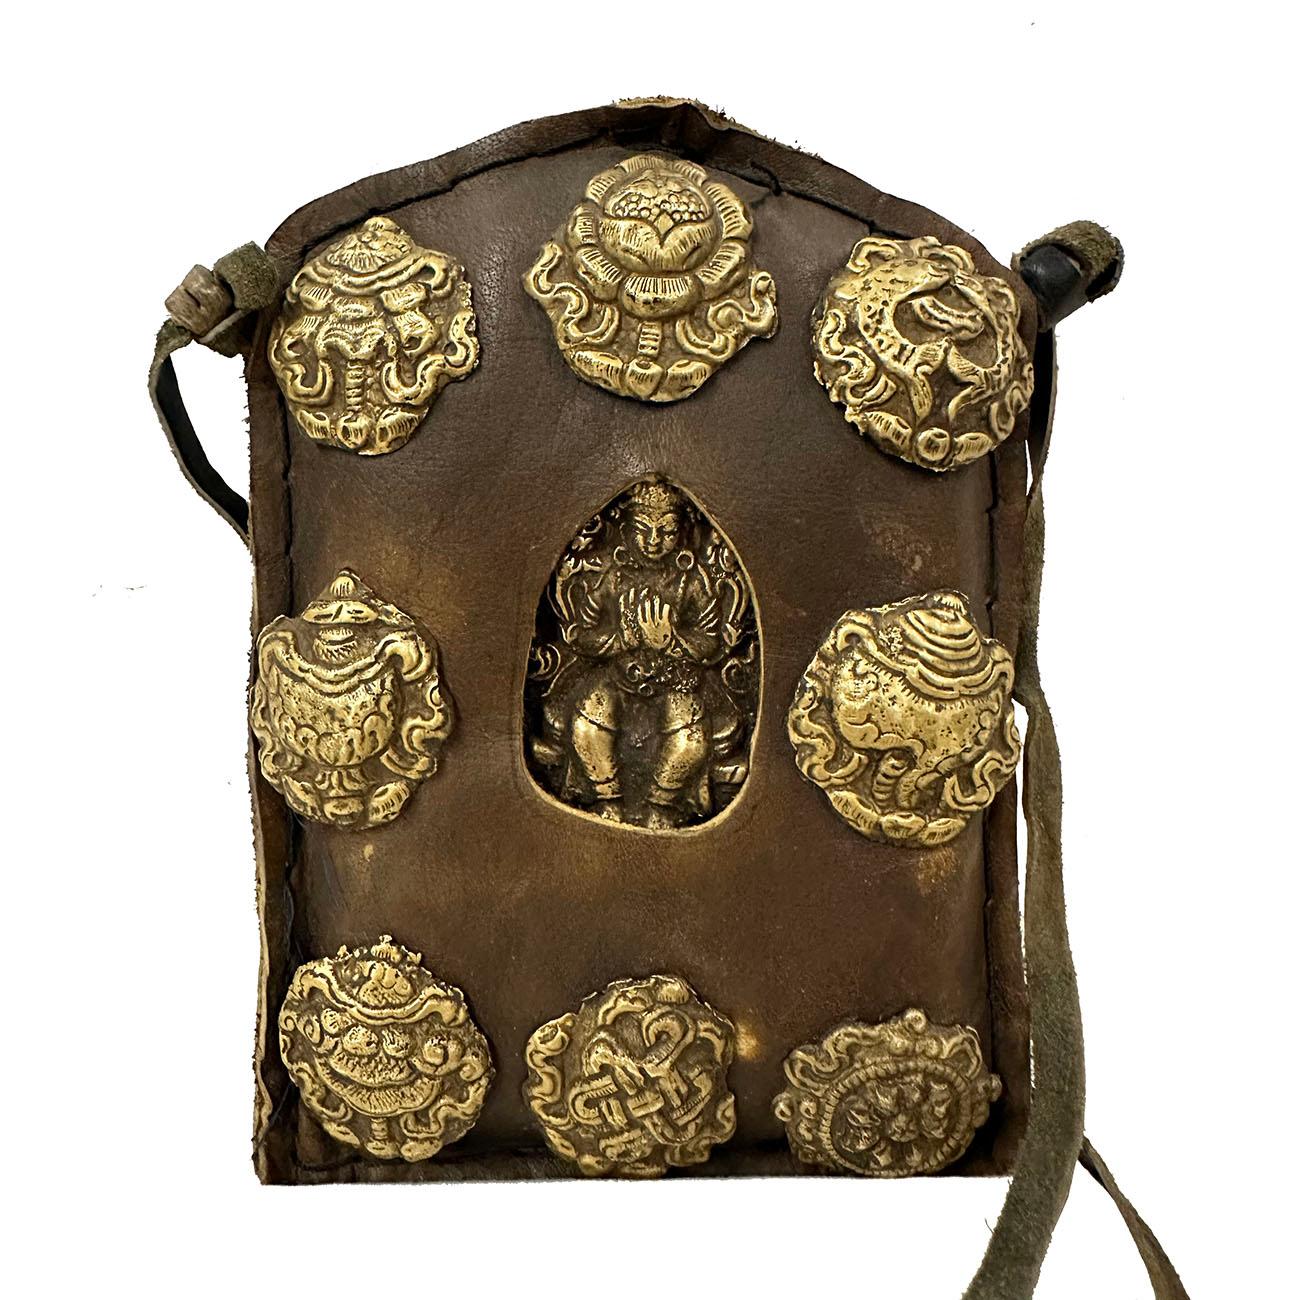 Ghau is a small prayer box/bag worn as pendant by Buddhists as portable shrines which can be pray by prayer during their travel. This Ghau prayer bag (travel Buddha shrine) made from Leather and decorated in repoussé with the cintamani, or jewel of